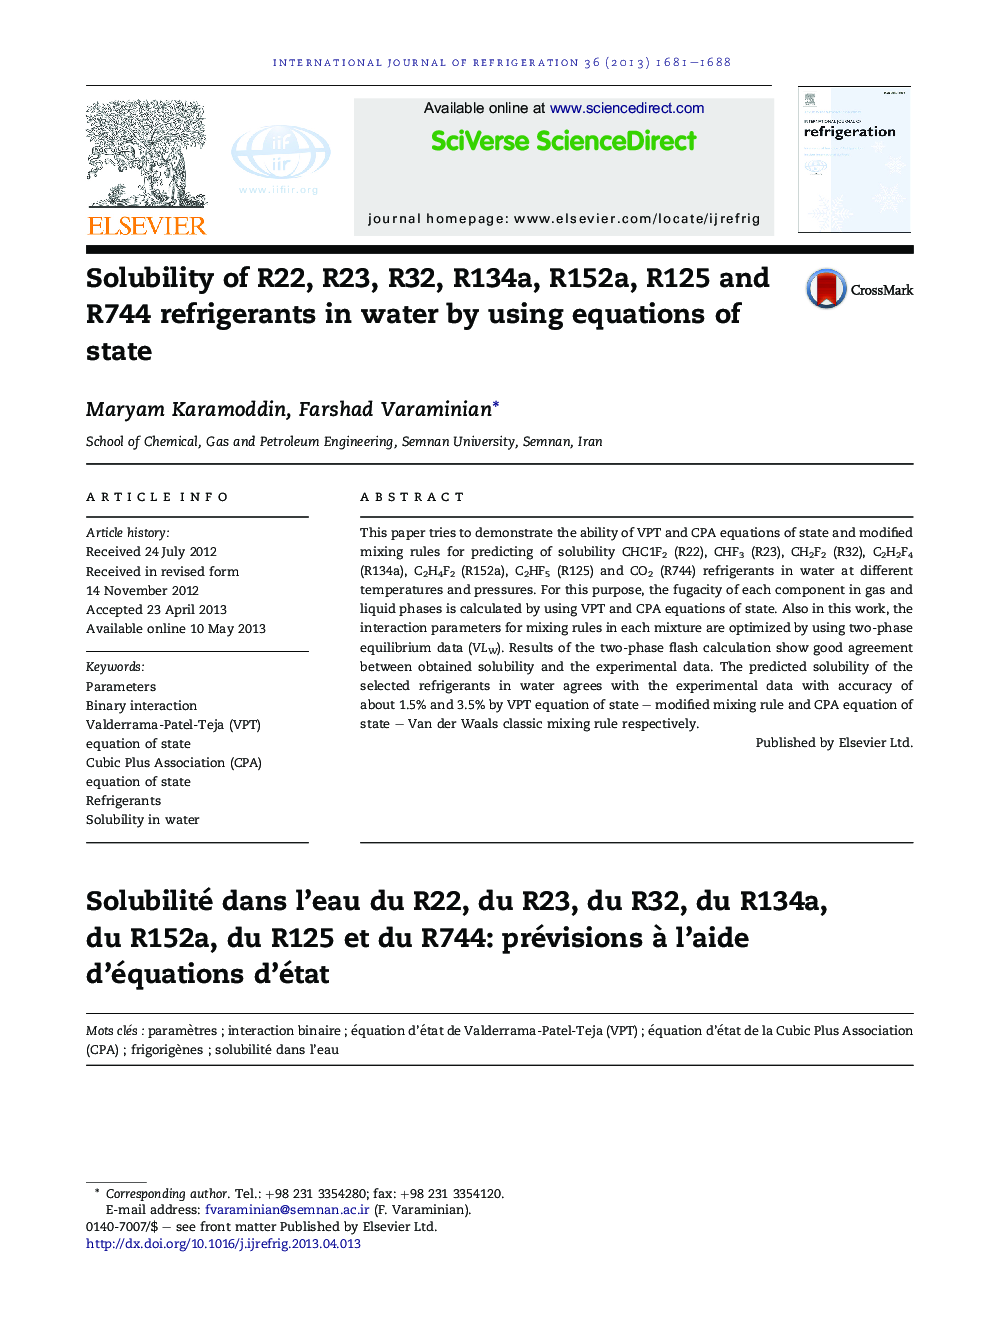 Solubility of R22, R23, R32, R134a, R152a, R125 and R744 refrigerants in water by using equations of state